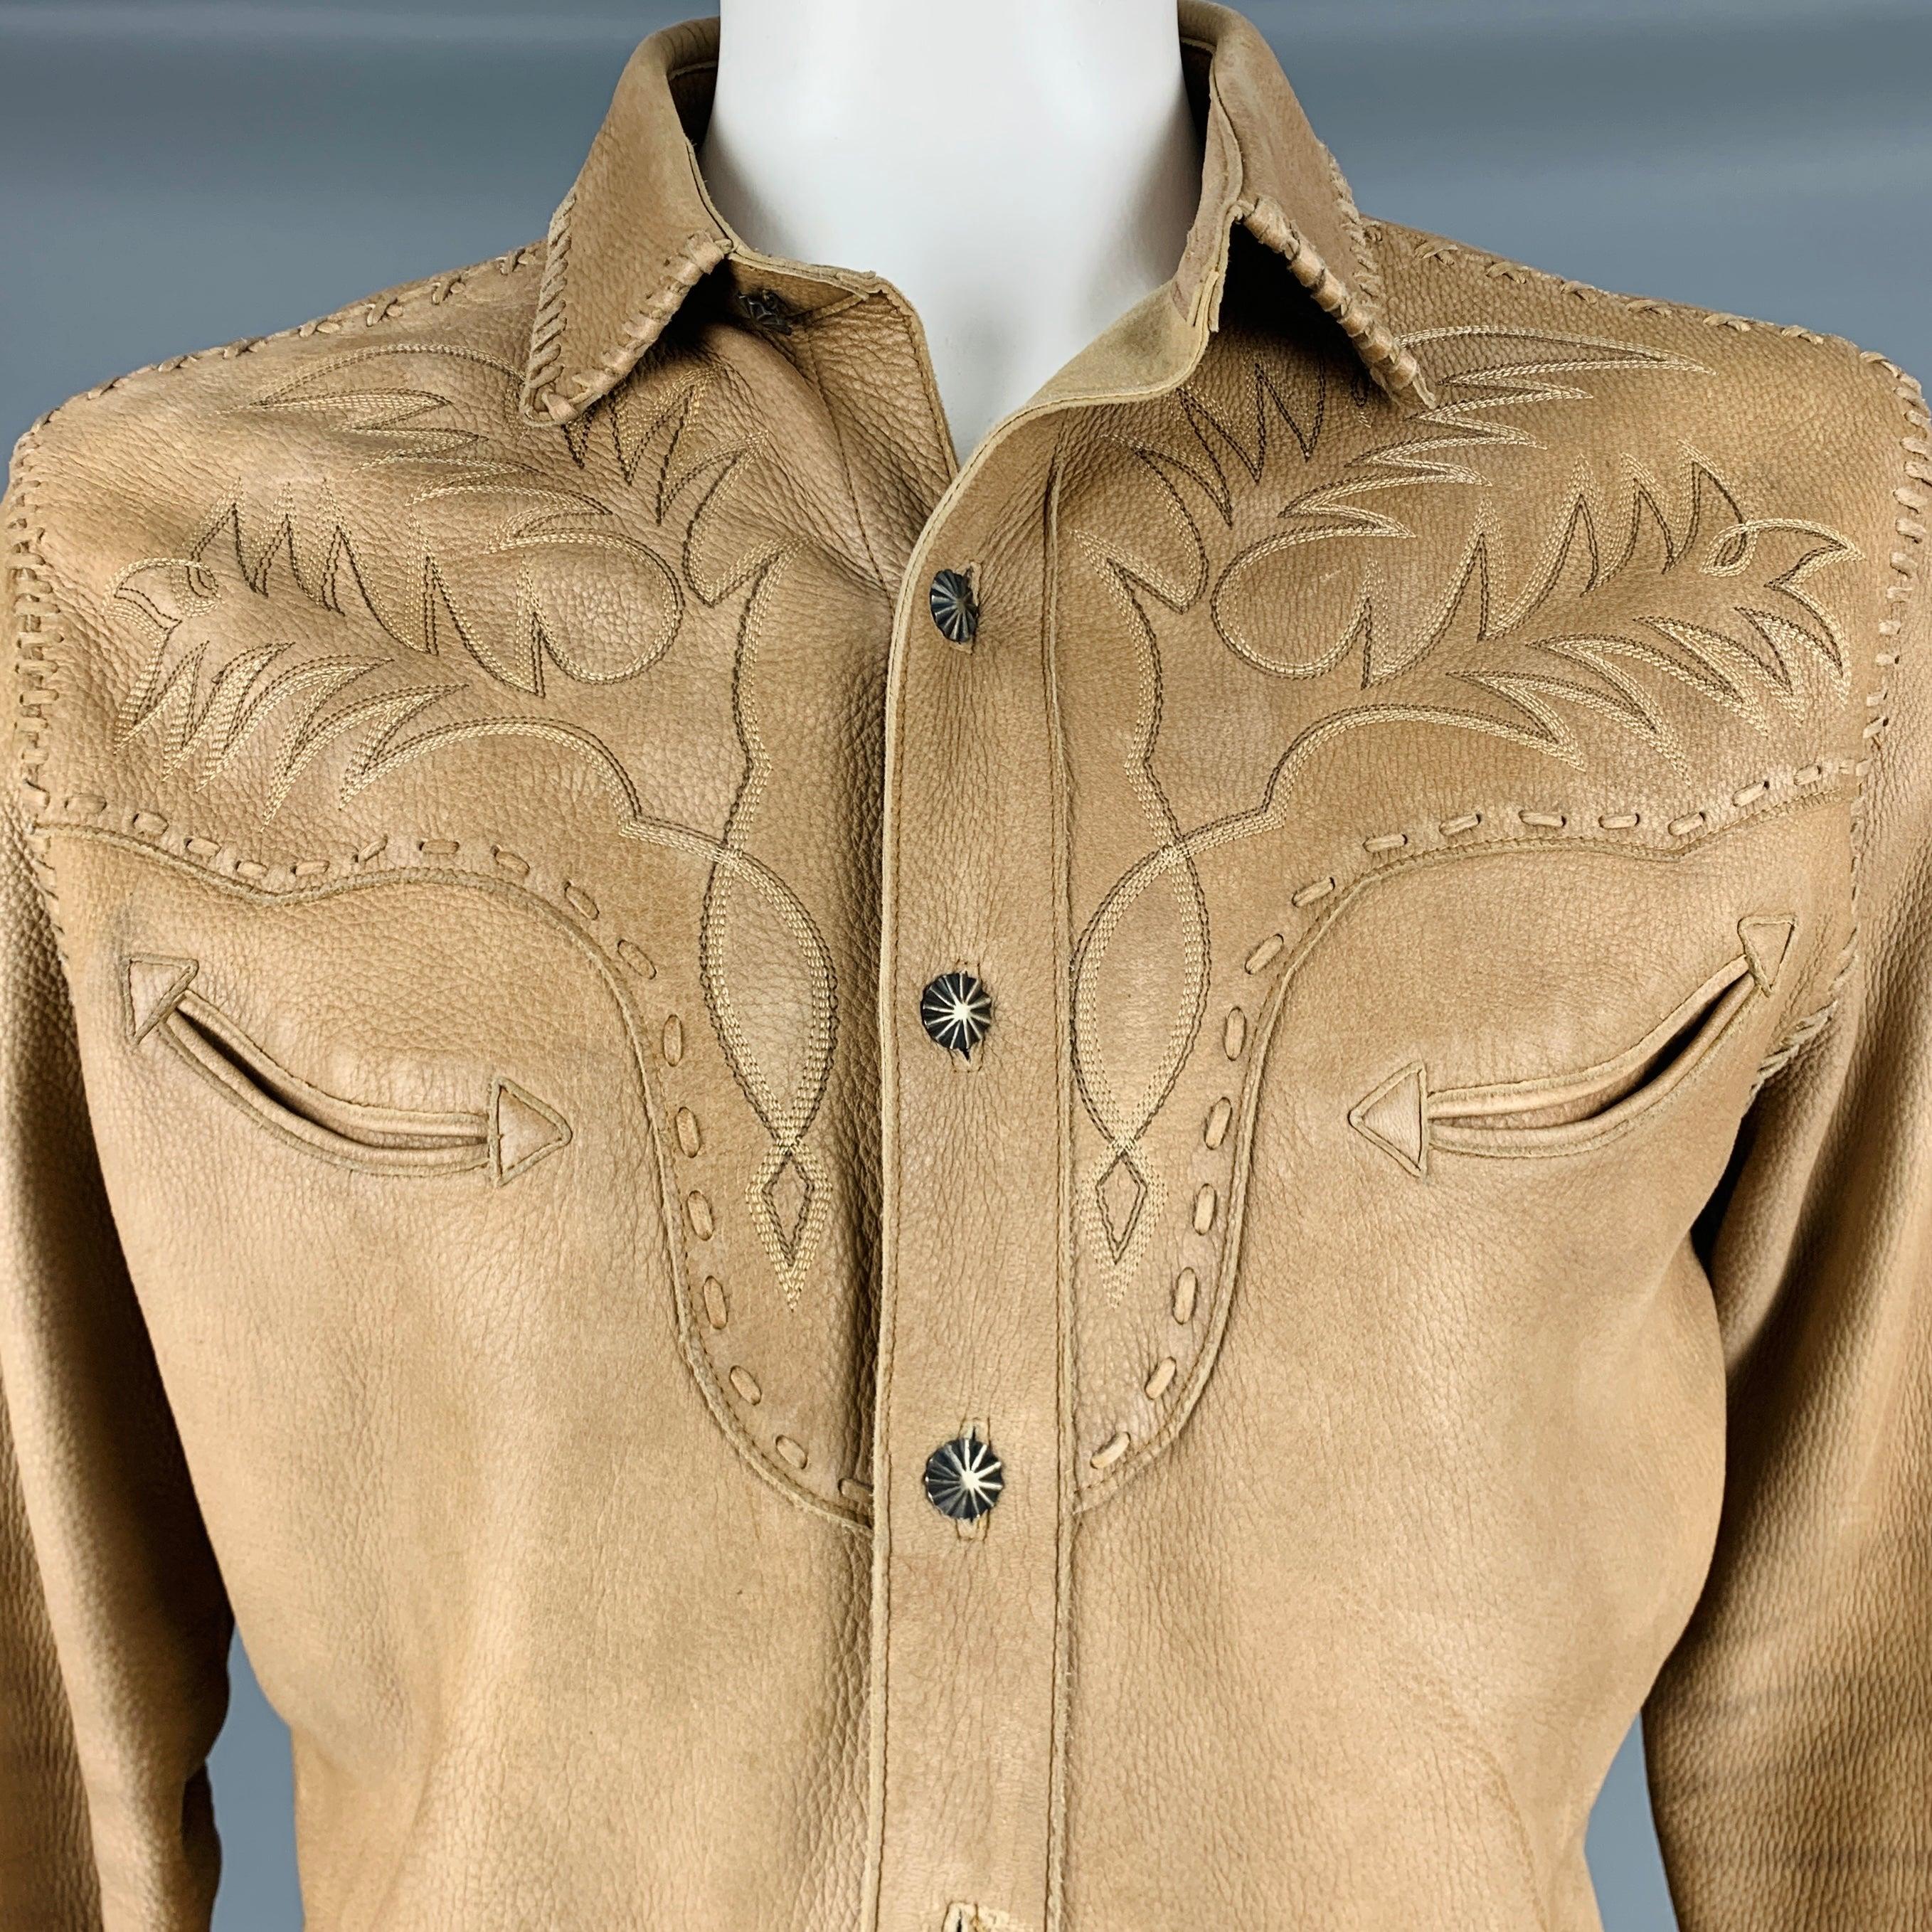 RALPH LAUREN long sleeve shirt
in a tan leather fabric featuring brown Western-style embroidery, brown contrast cuffs, two slit chest pockets, and button closure.Very Good Pre-Owned Condition. Moderate signs of wear. 

Marked:   L 

Measurements: 
